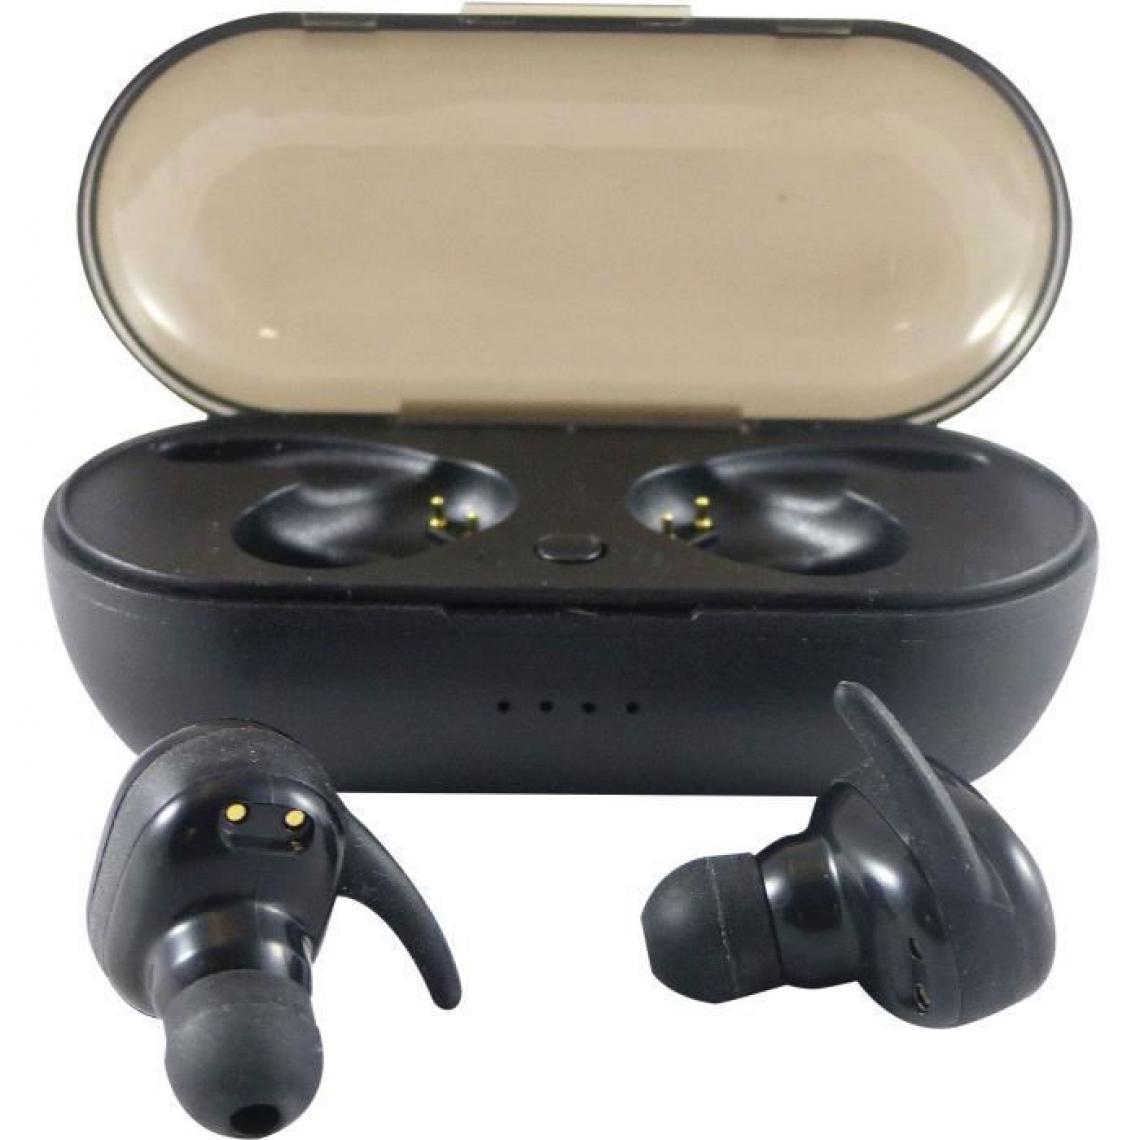 Inovalley - INOVALLEY CO4BTH B Ecouteurs stéréo bluetooth - Noir - Ecouteurs intra-auriculaires